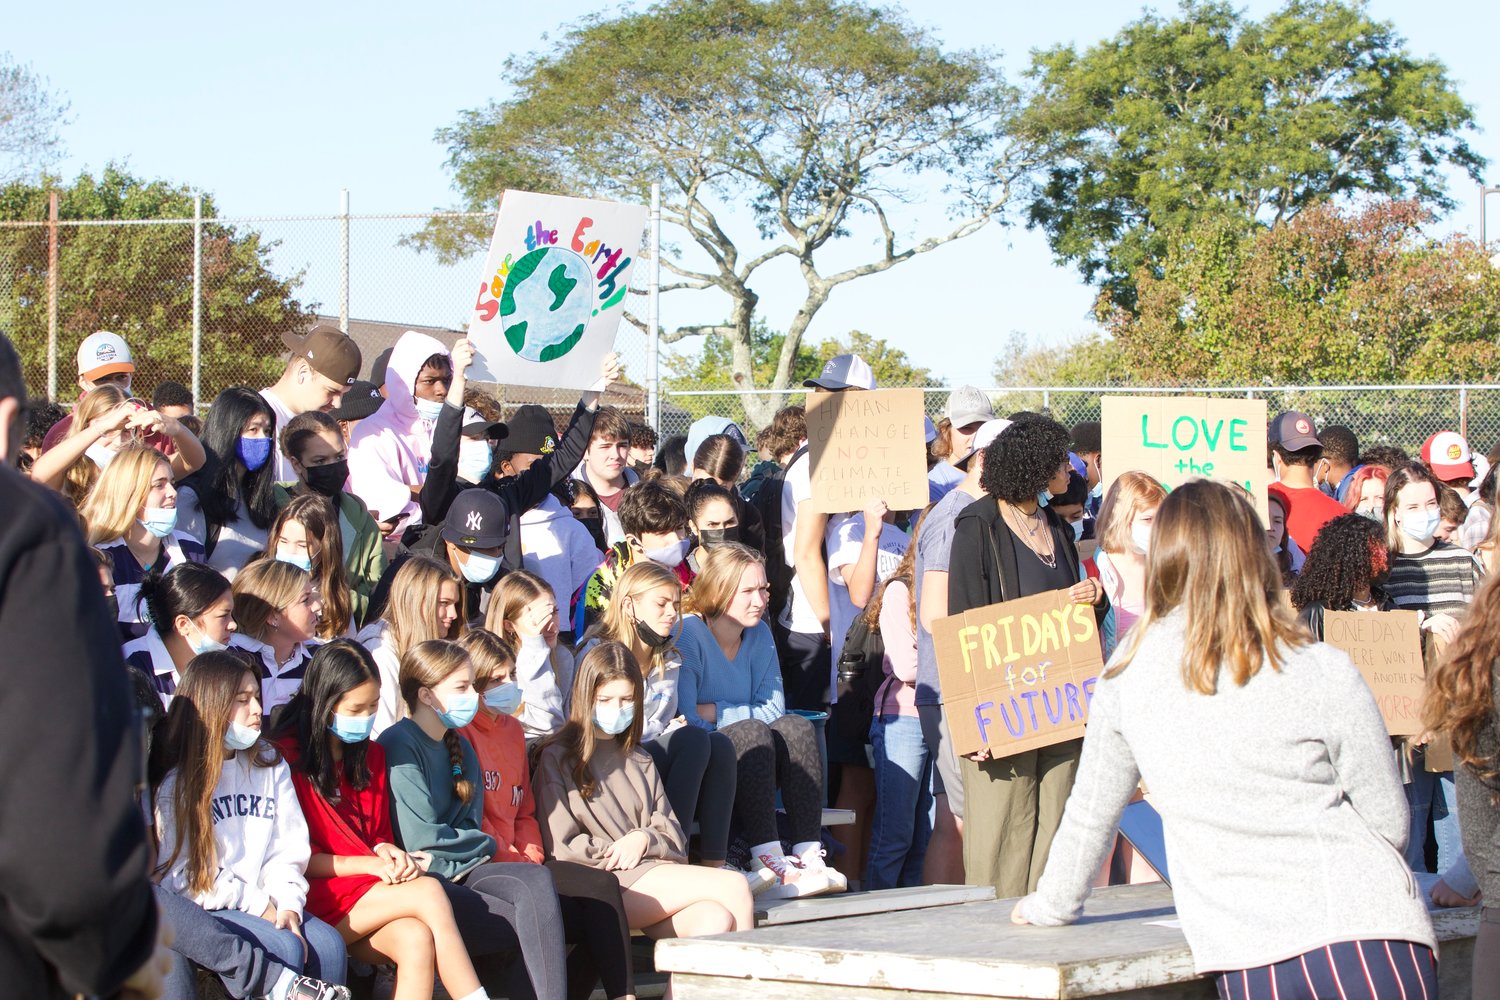 Nantucket High School students staged a walkout Friday to demand action and raise awareness of climate change.